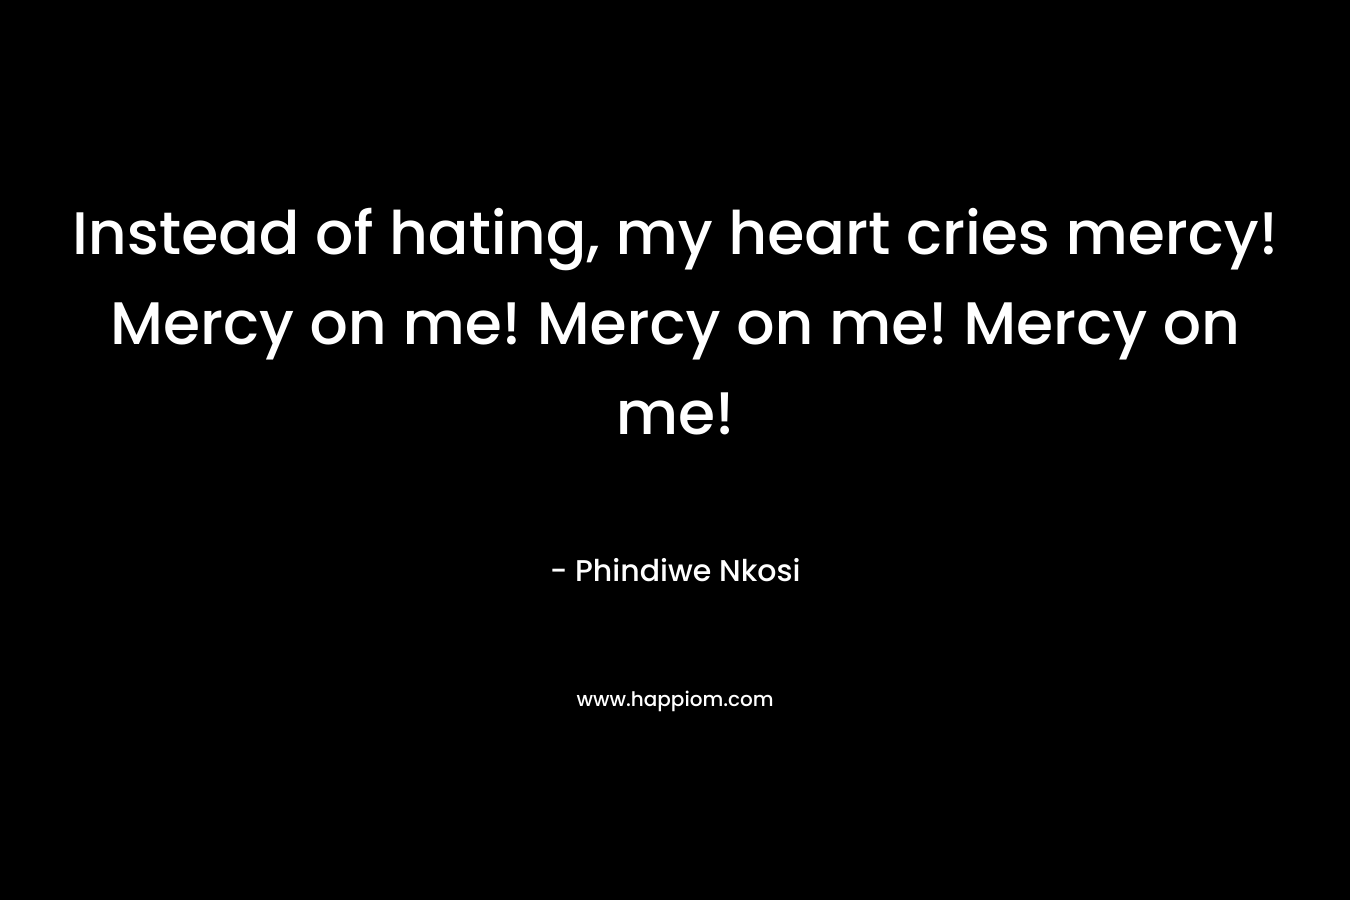 Instead of hating, my heart cries mercy! Mercy on me! Mercy on me! Mercy on me!